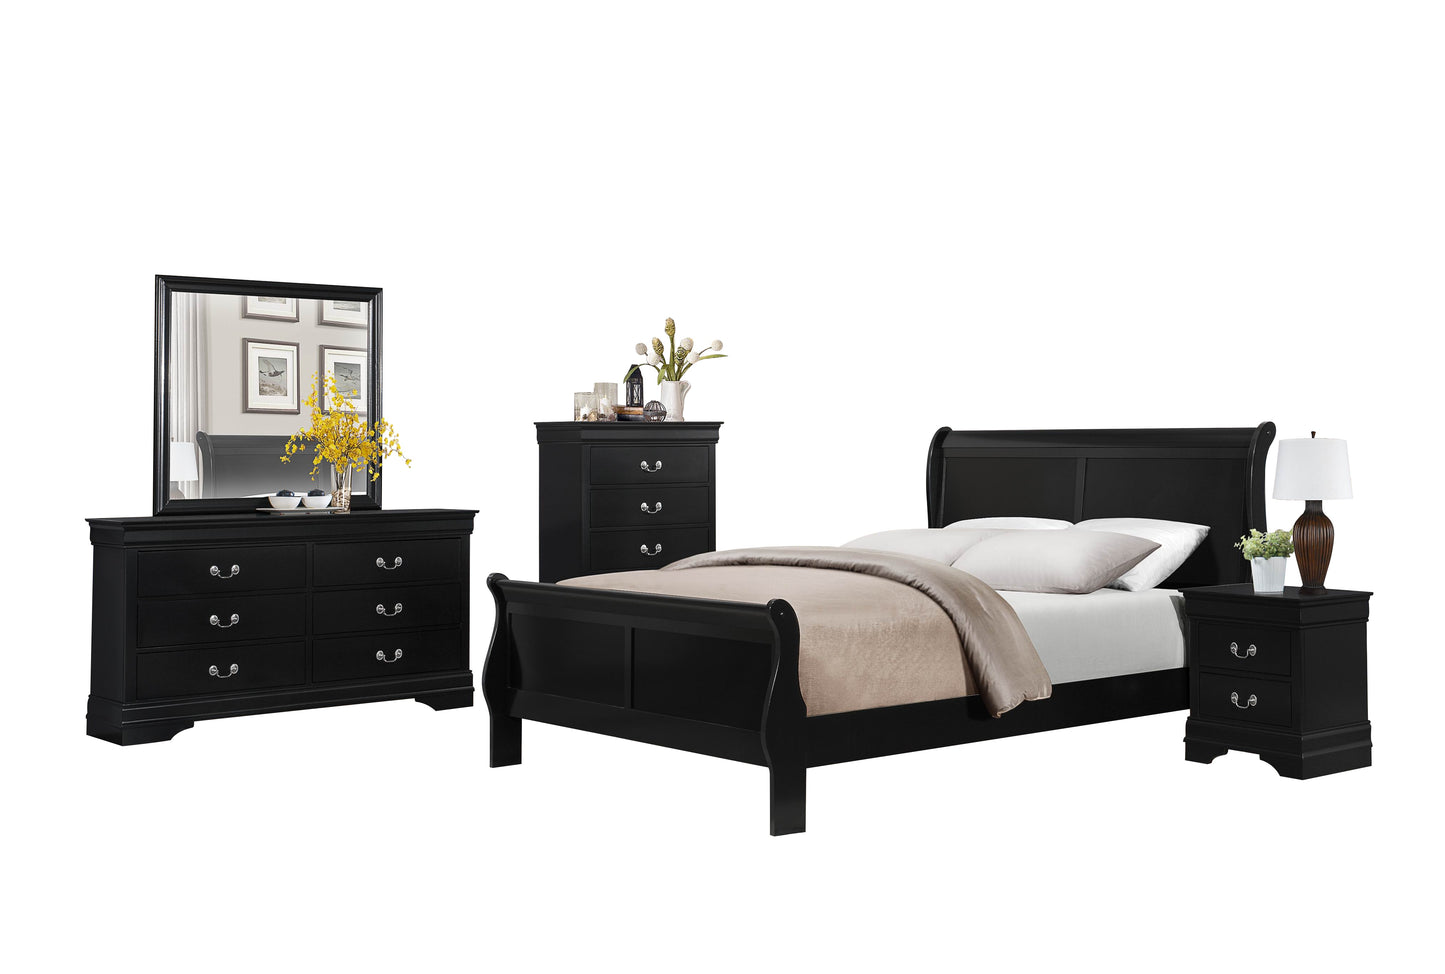 Manburg Louis Philippe 5PC Bedroom Set E King Sleigh Bed, Dresser, Mirror, Nightstand, Chest in Burnished Black